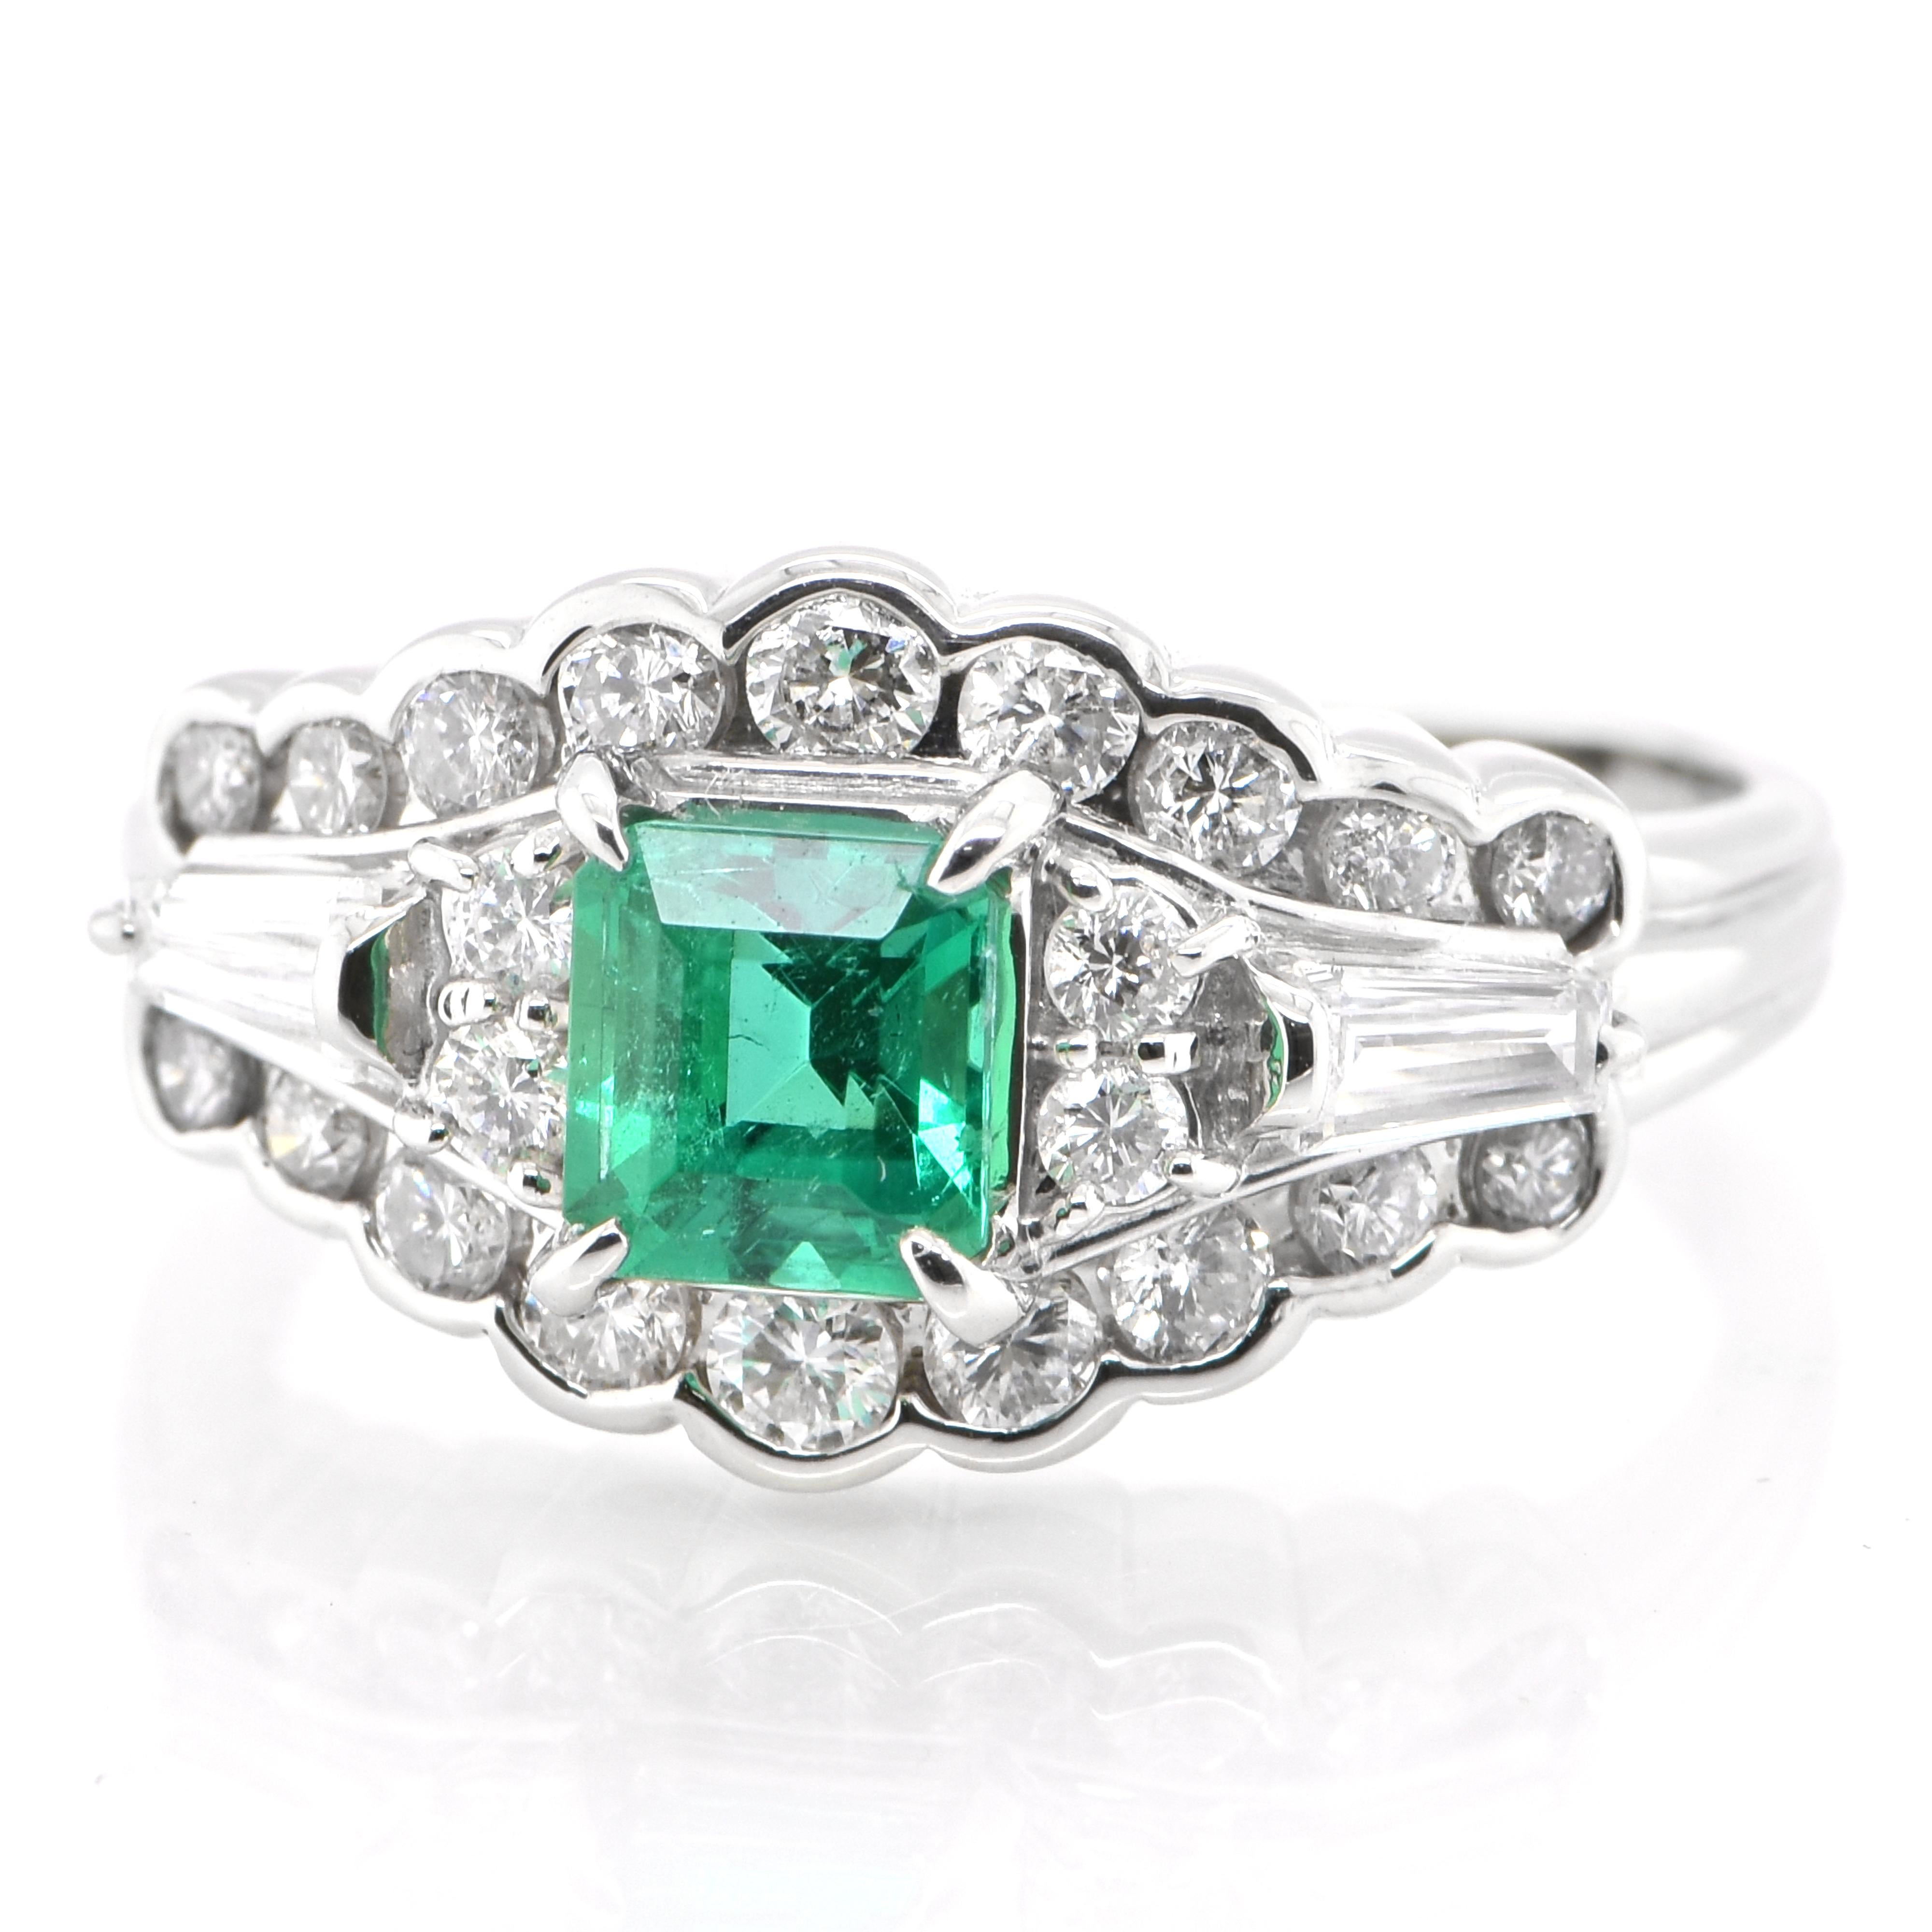 A stunning ring featuring a 0.76 Carat Natural Emerald and 0.62 Carats of Diamond Accents set in Platinum. People have admired emerald’s green for thousands of years. Emeralds have always been associated with the lushest landscapes and the richest